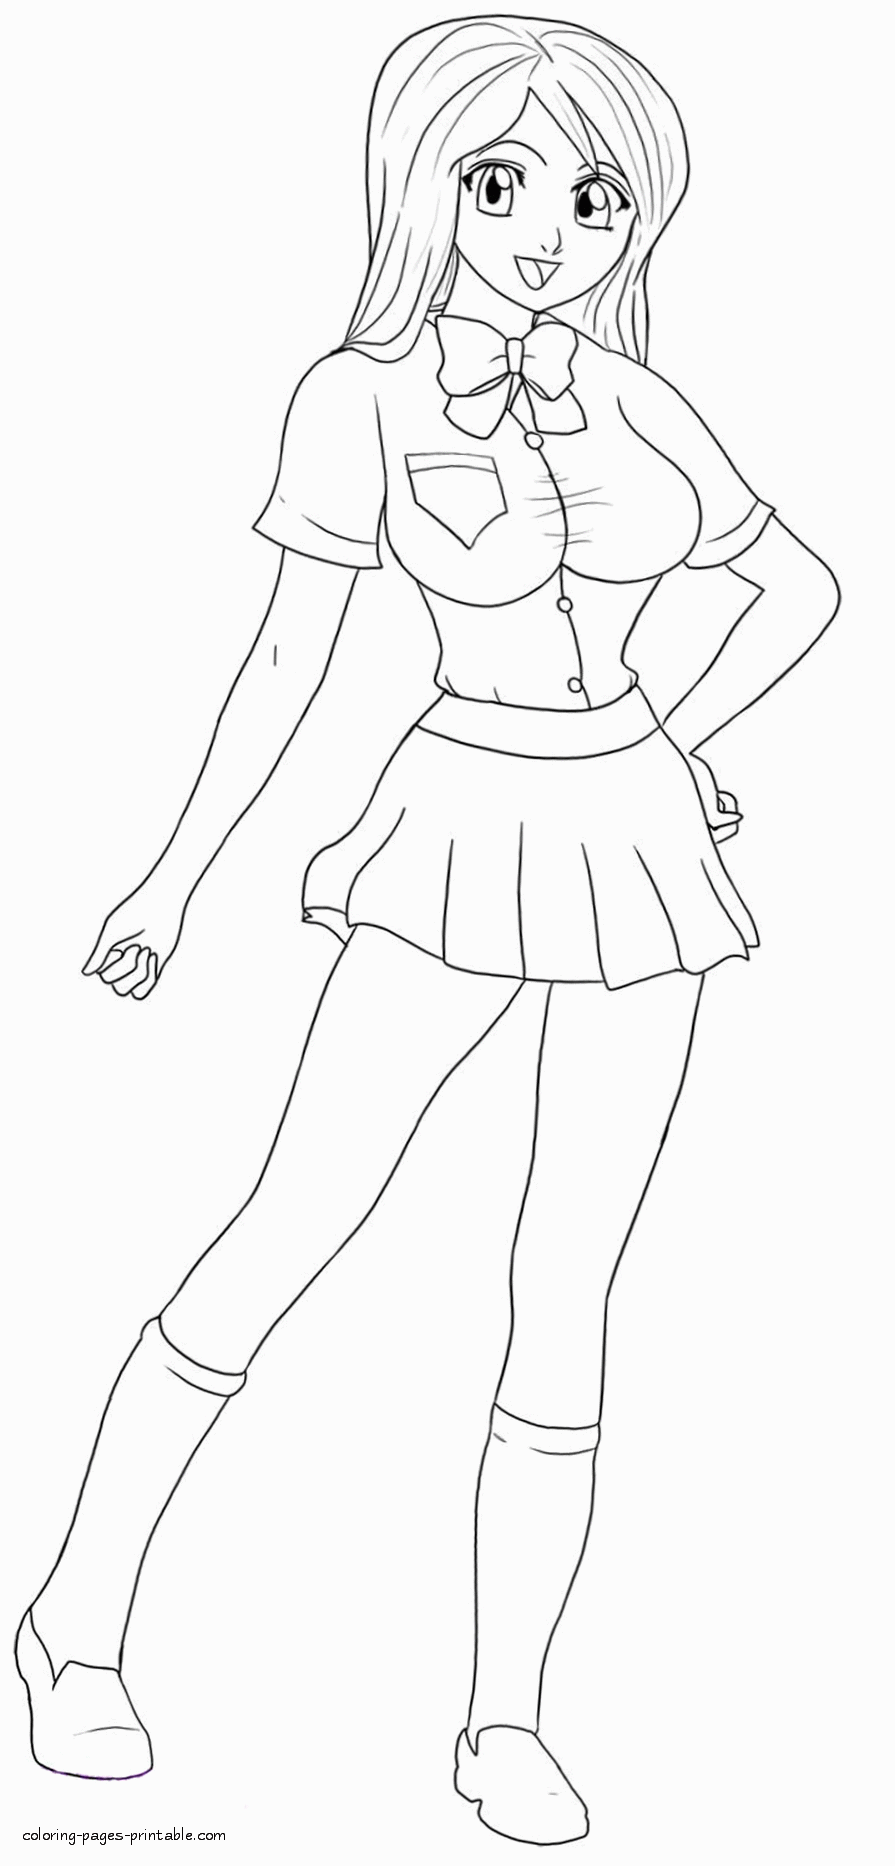 Bleach coloring pages of Orihime Inoue || COLORING-PAGES-PRINTABLE.COM